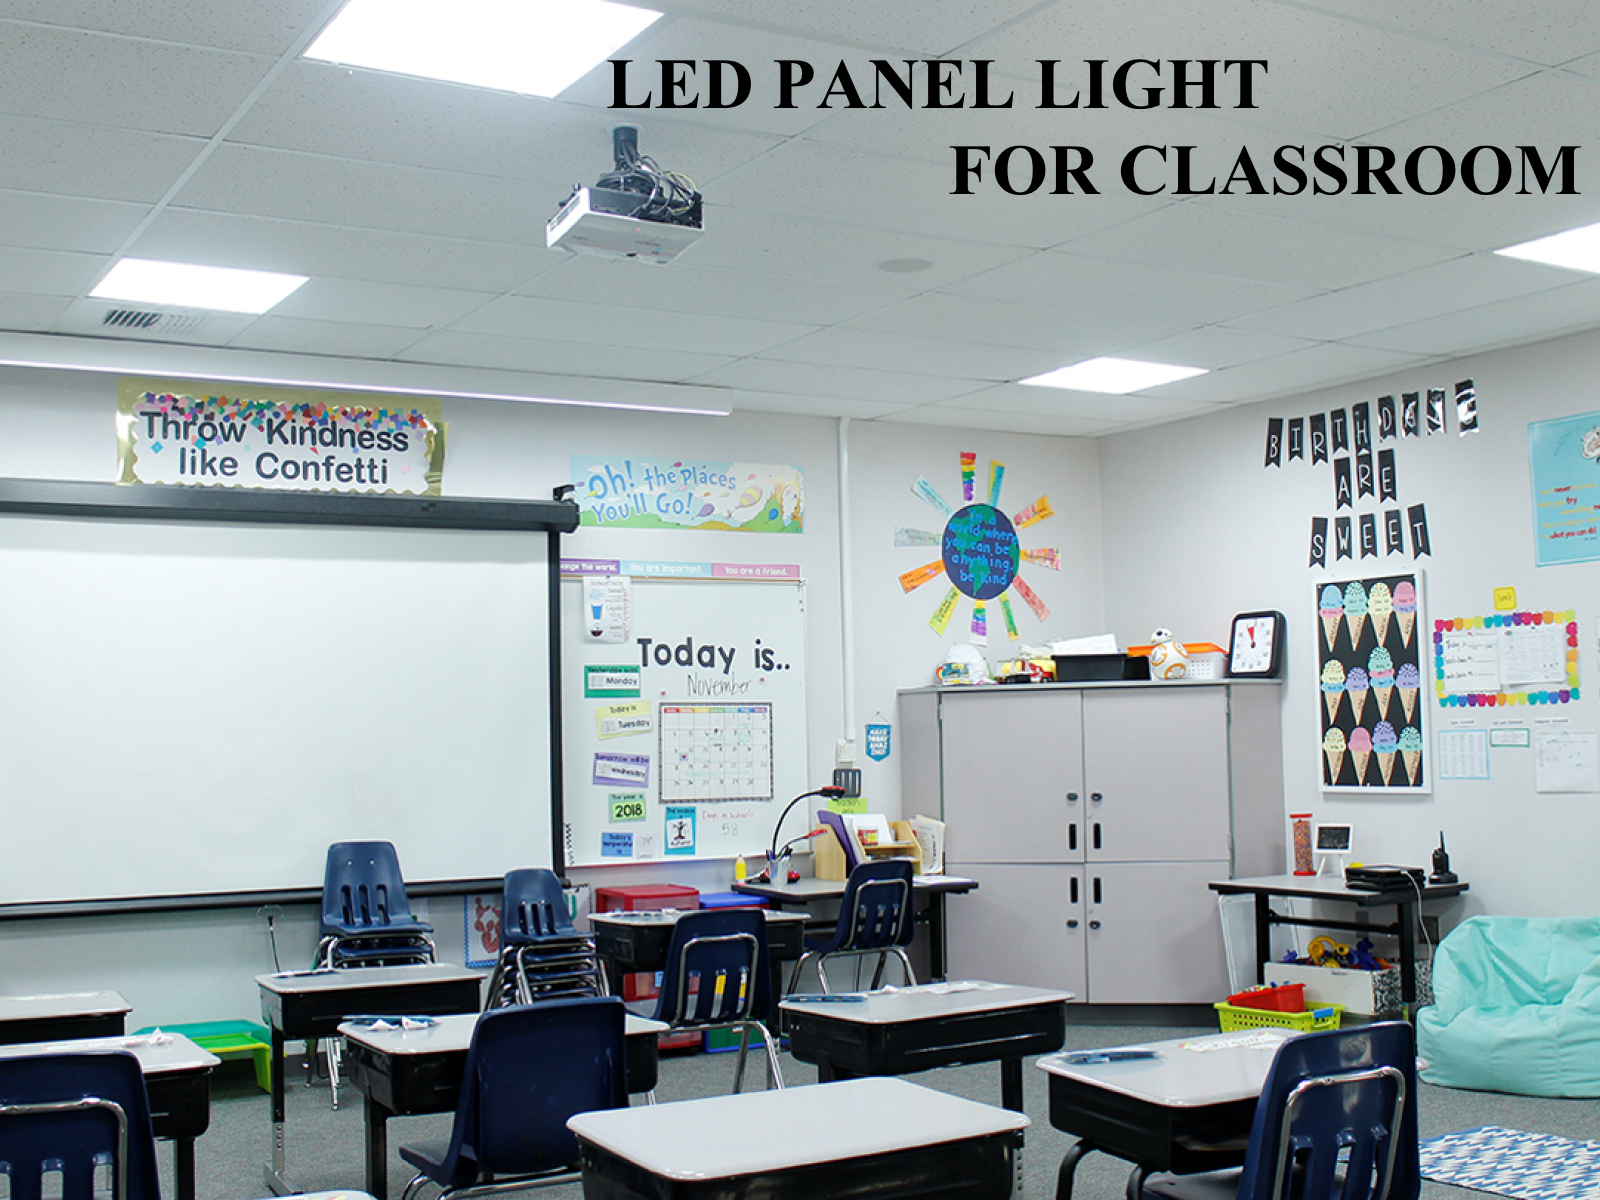 Illumination, power, color temperature requirements, and installation specifications of LED lamps for classrooms